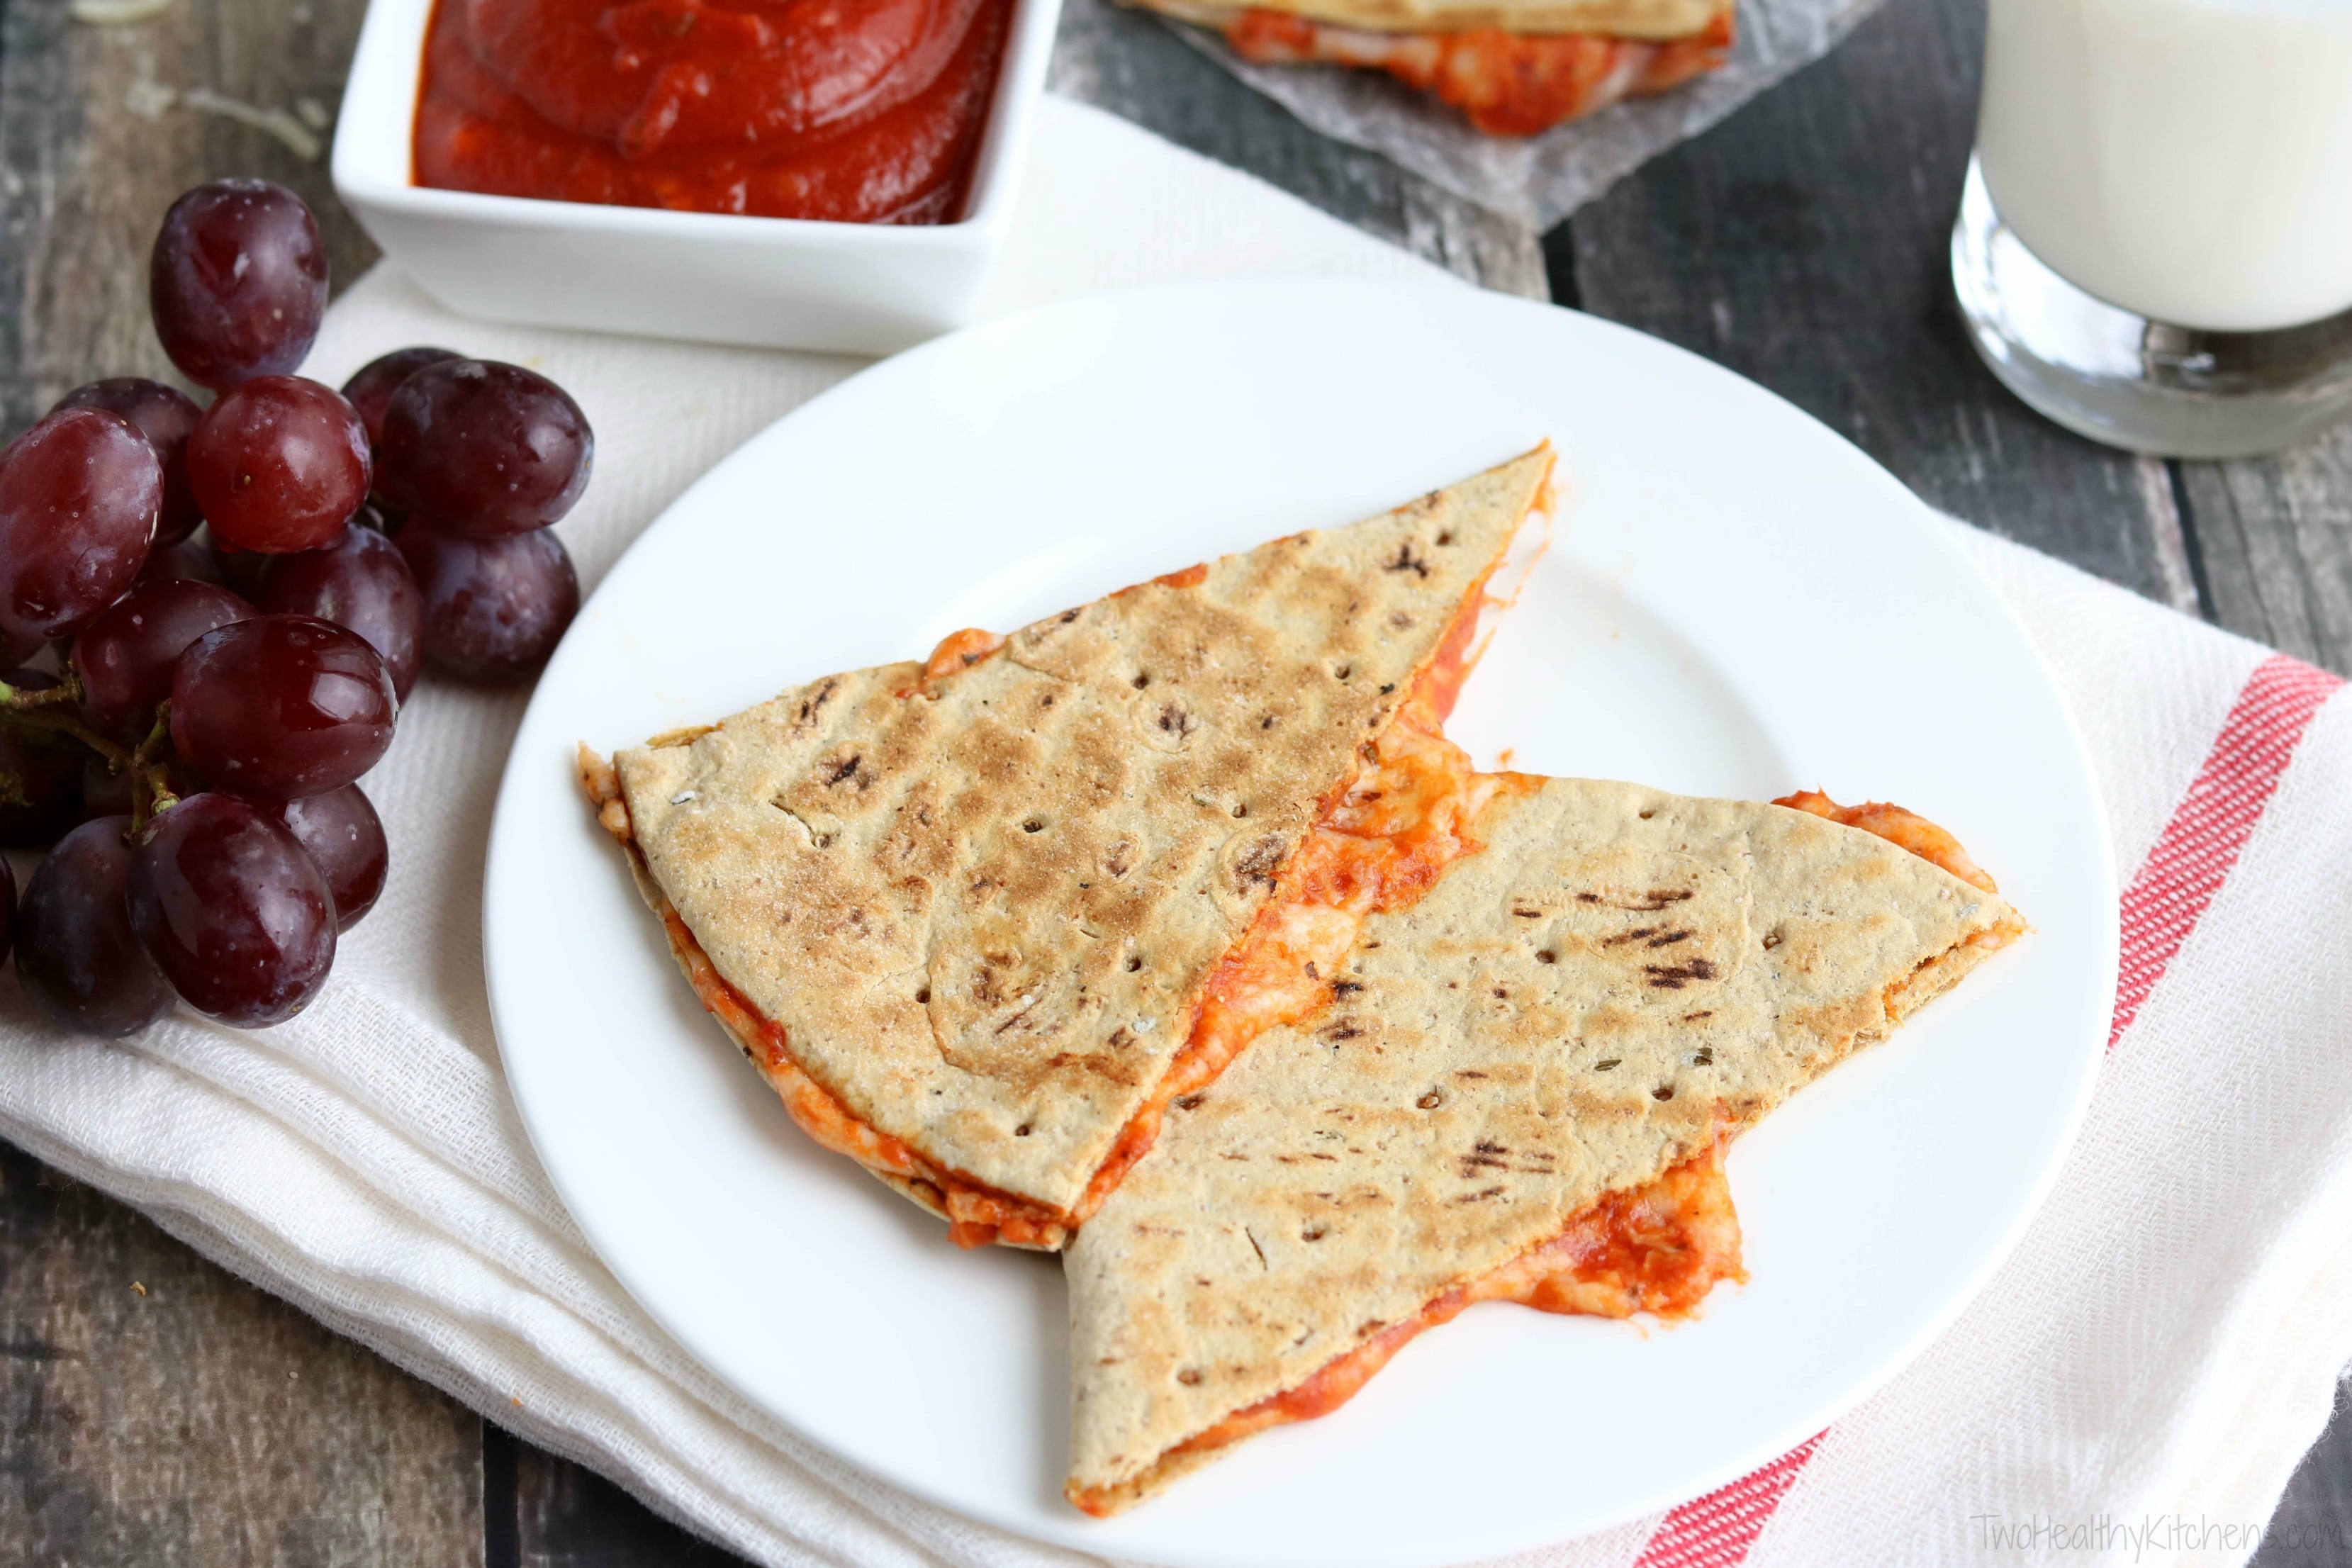 Two quesadilla wedges served on white plate with bunch of grapes, dish of marinara dip and glass of milk surrounding.